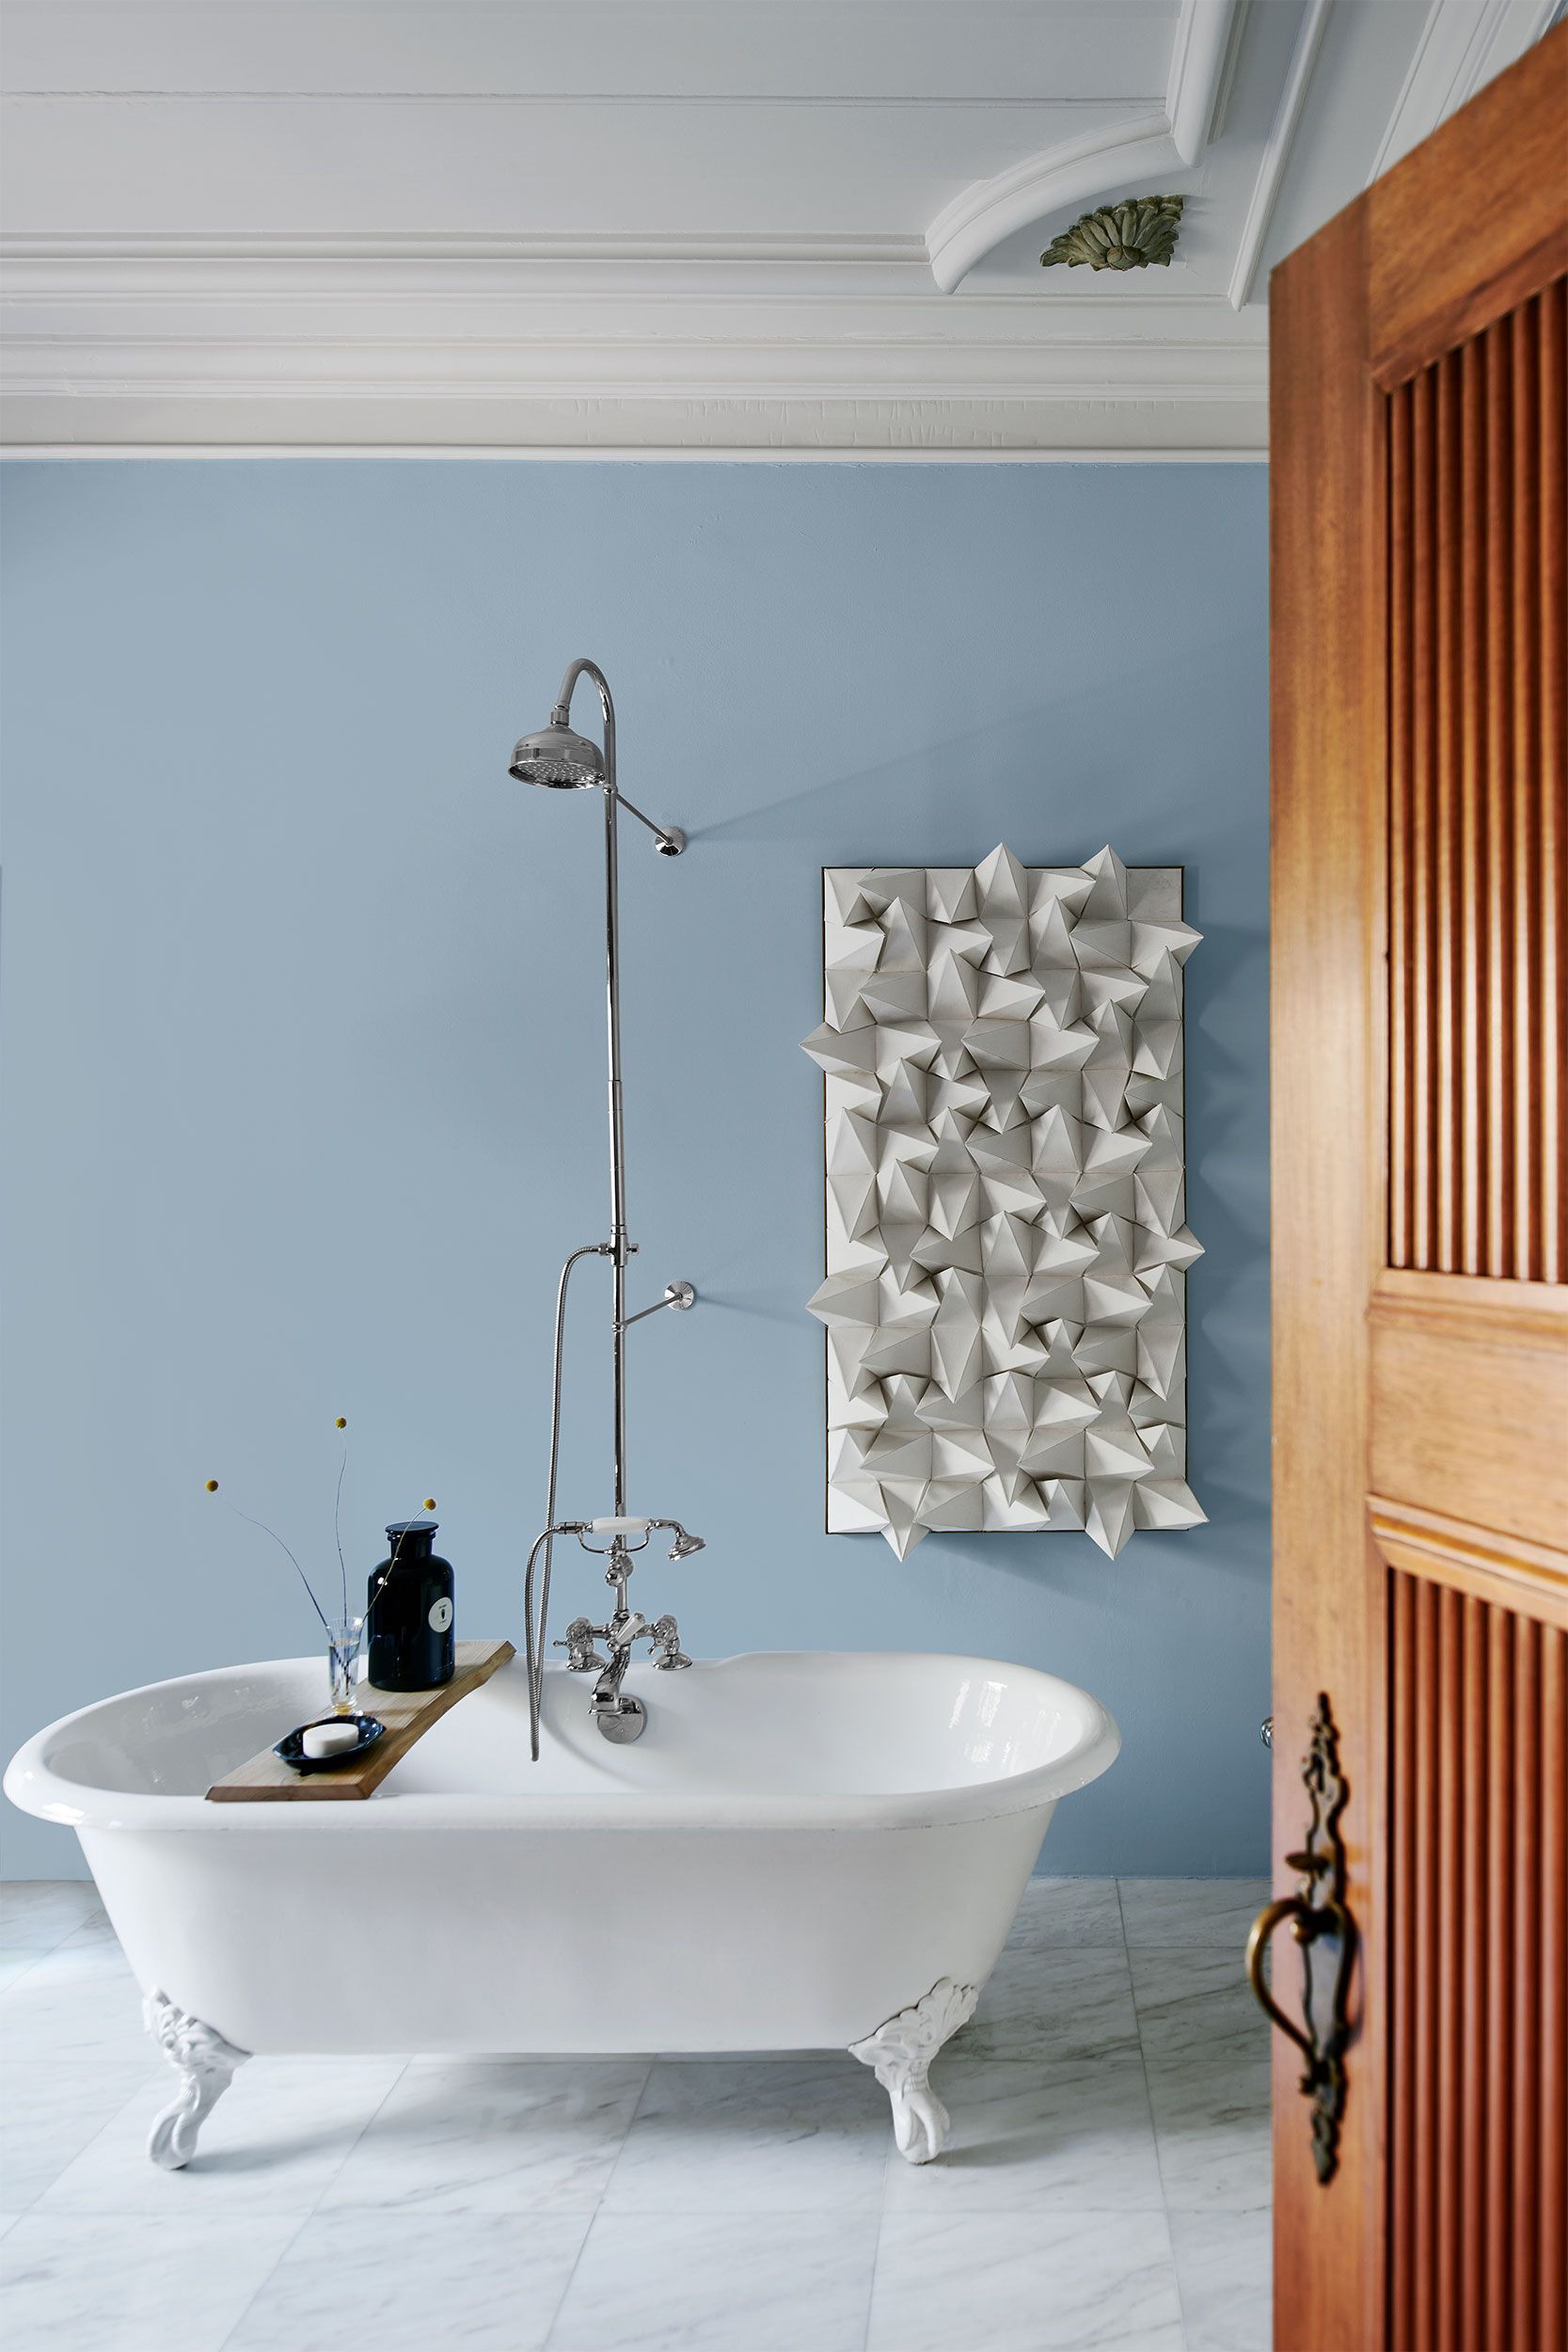 Bathroom Accessories That Let You Tweak The Decor To Your Liking